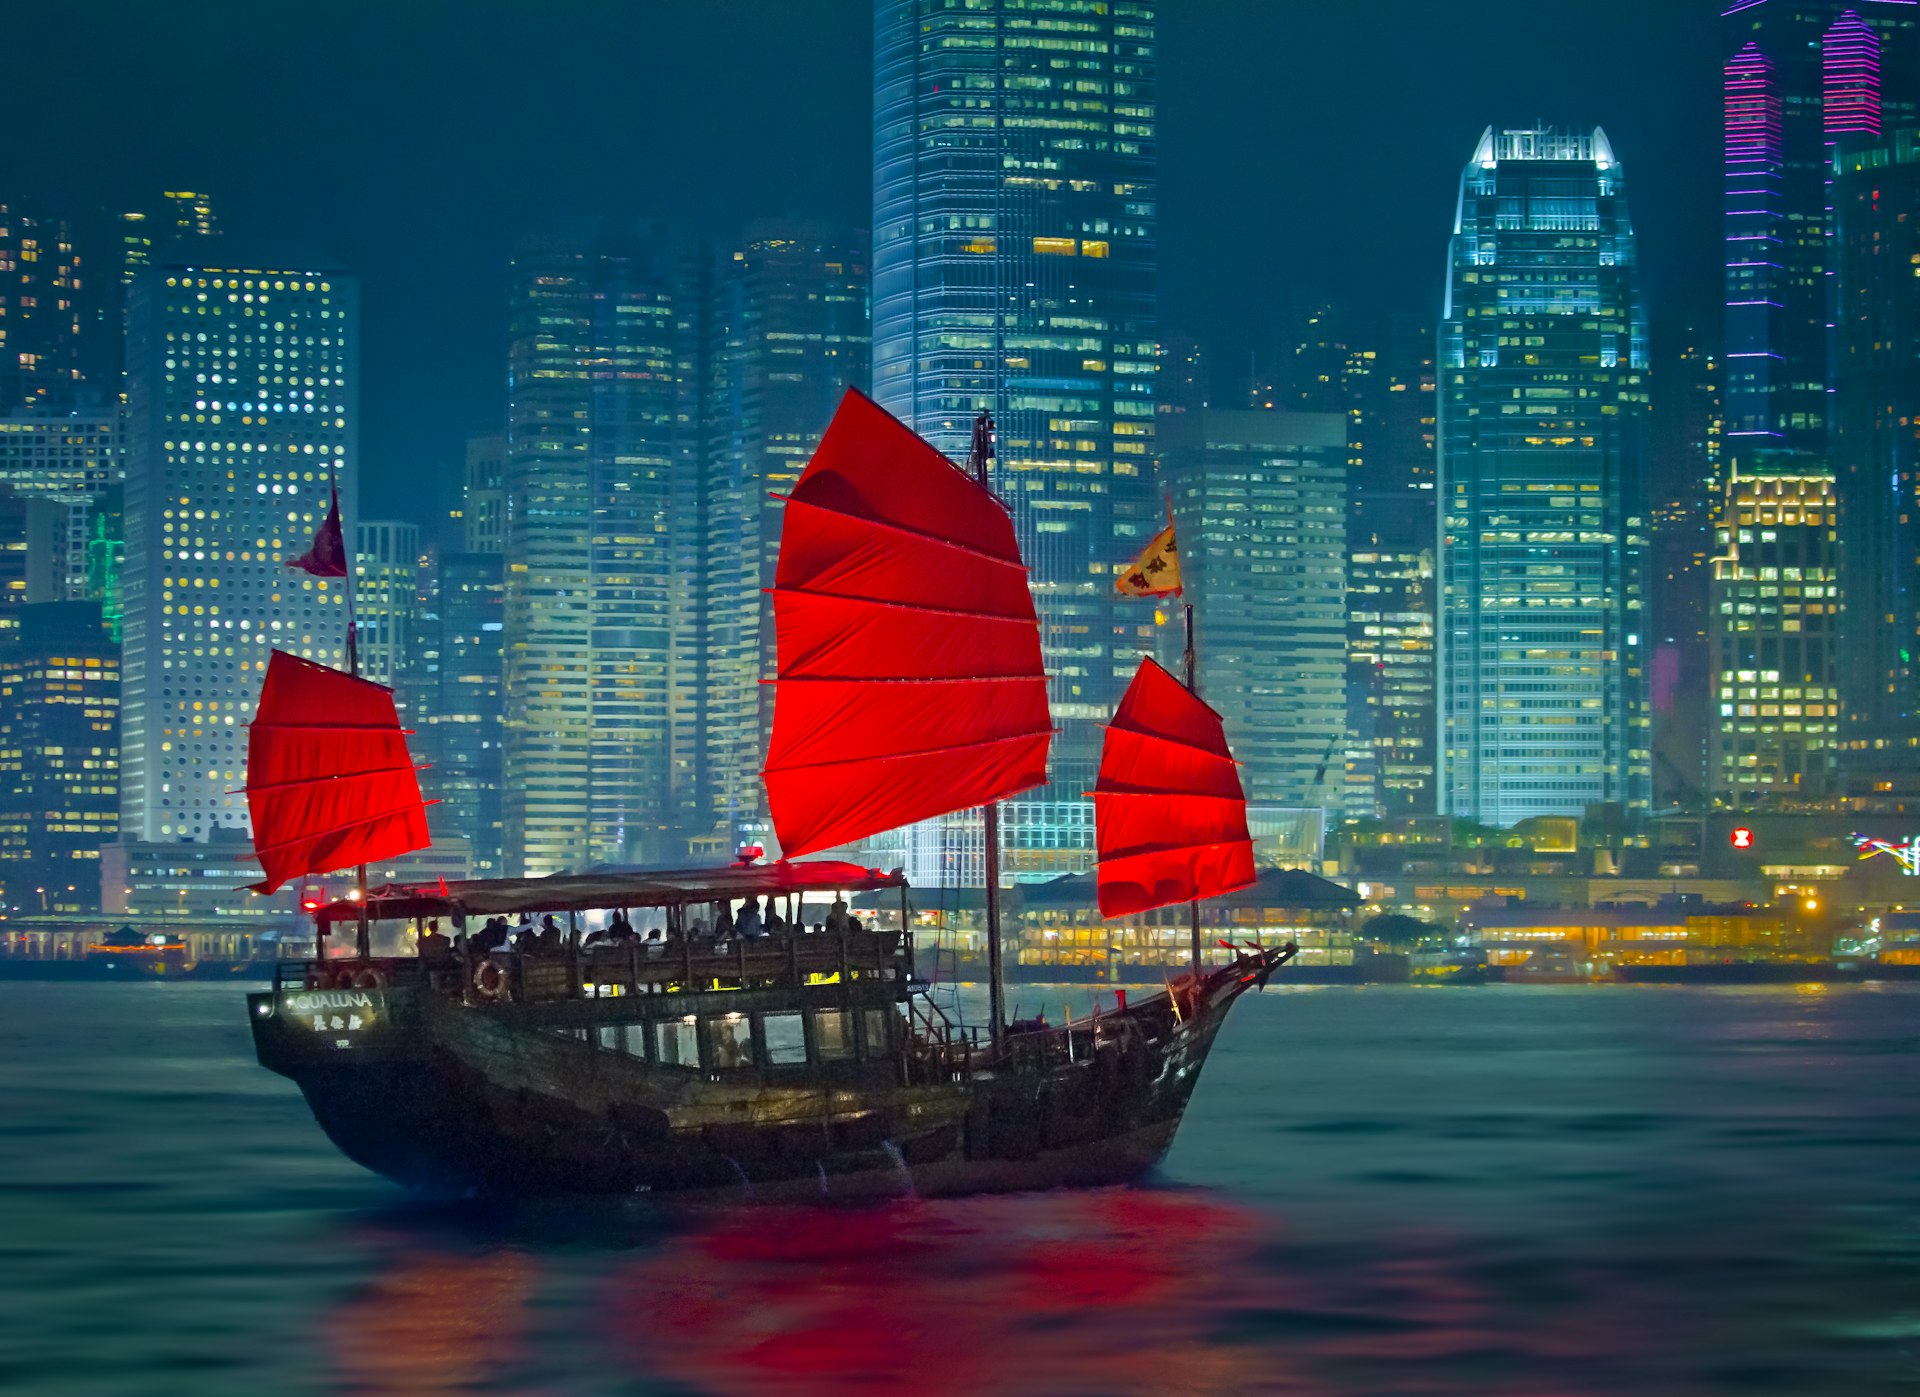 An old-fashioned junk boat with red sails in Hong Kong harbor, contrasts with the glass-and-steel skyscrapers in the background